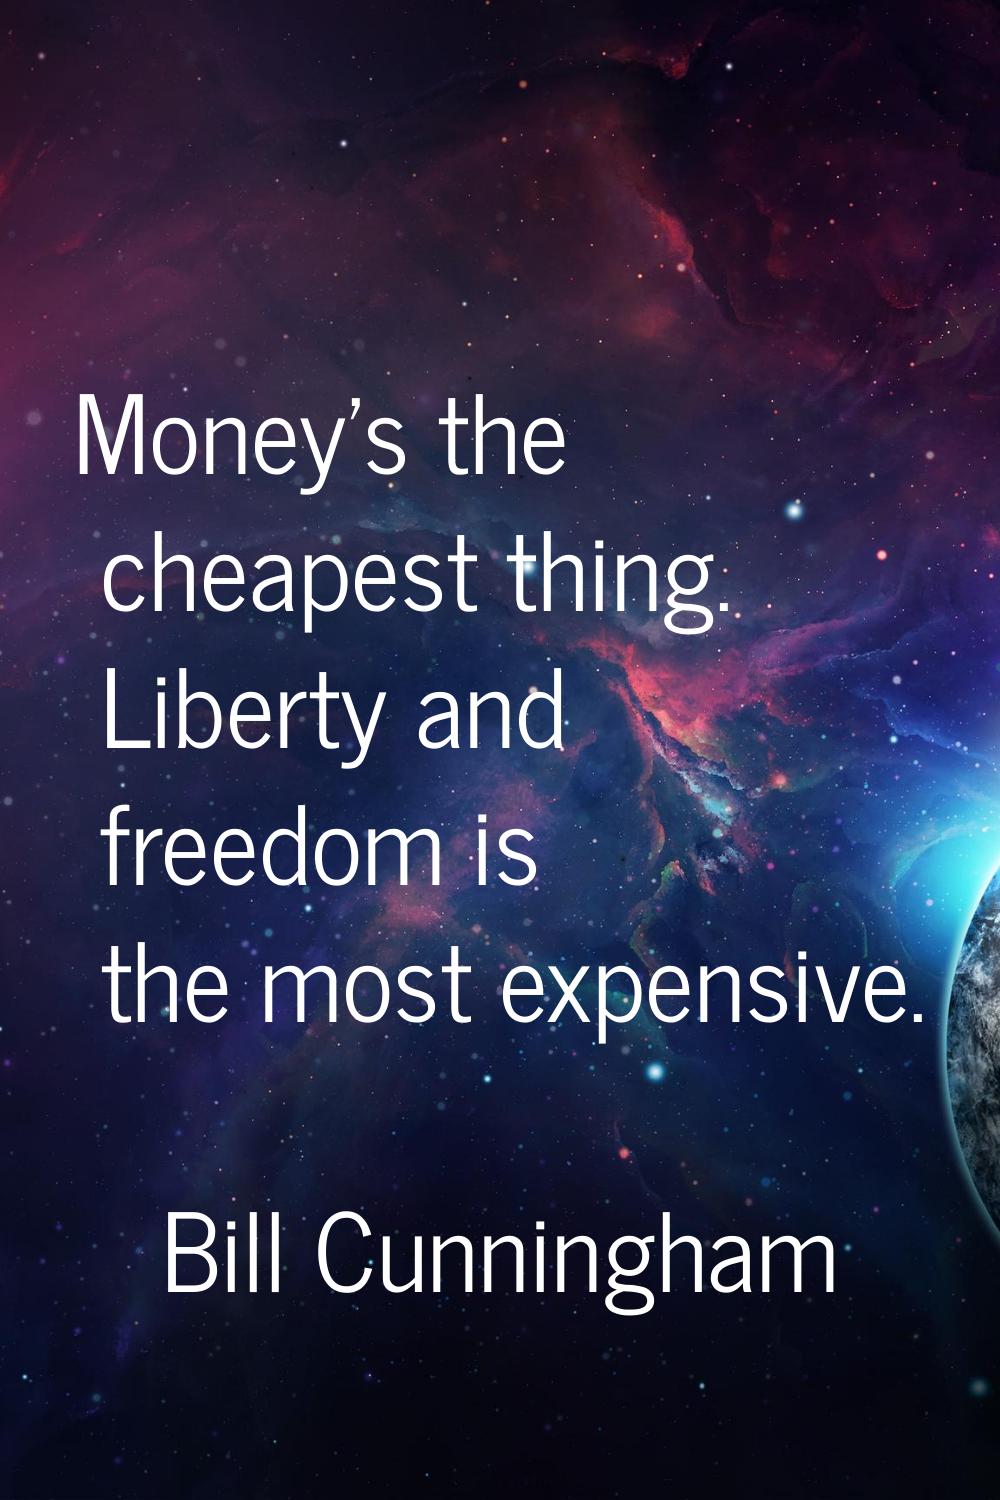 Money's the cheapest thing. Liberty and freedom is the most expensive.